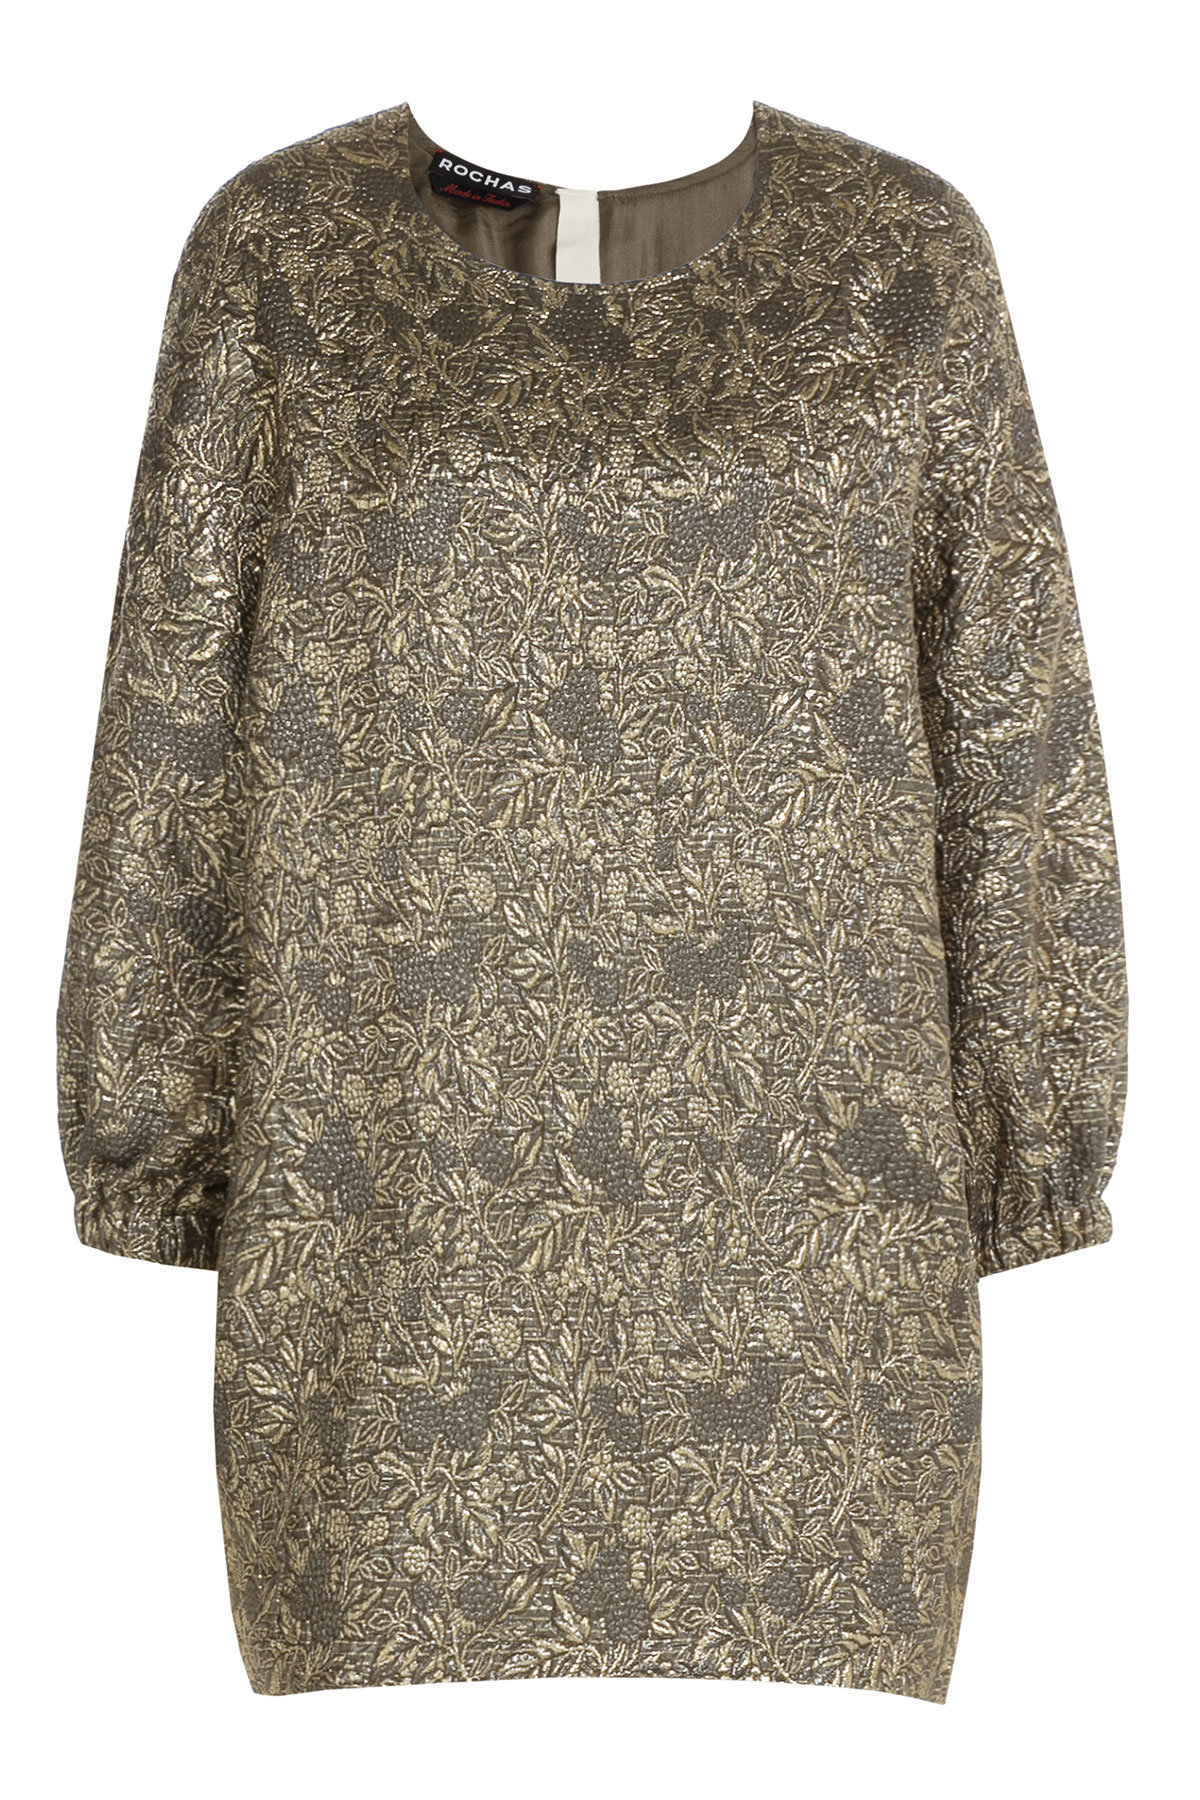 Oversize Jacquard Top by Rochas